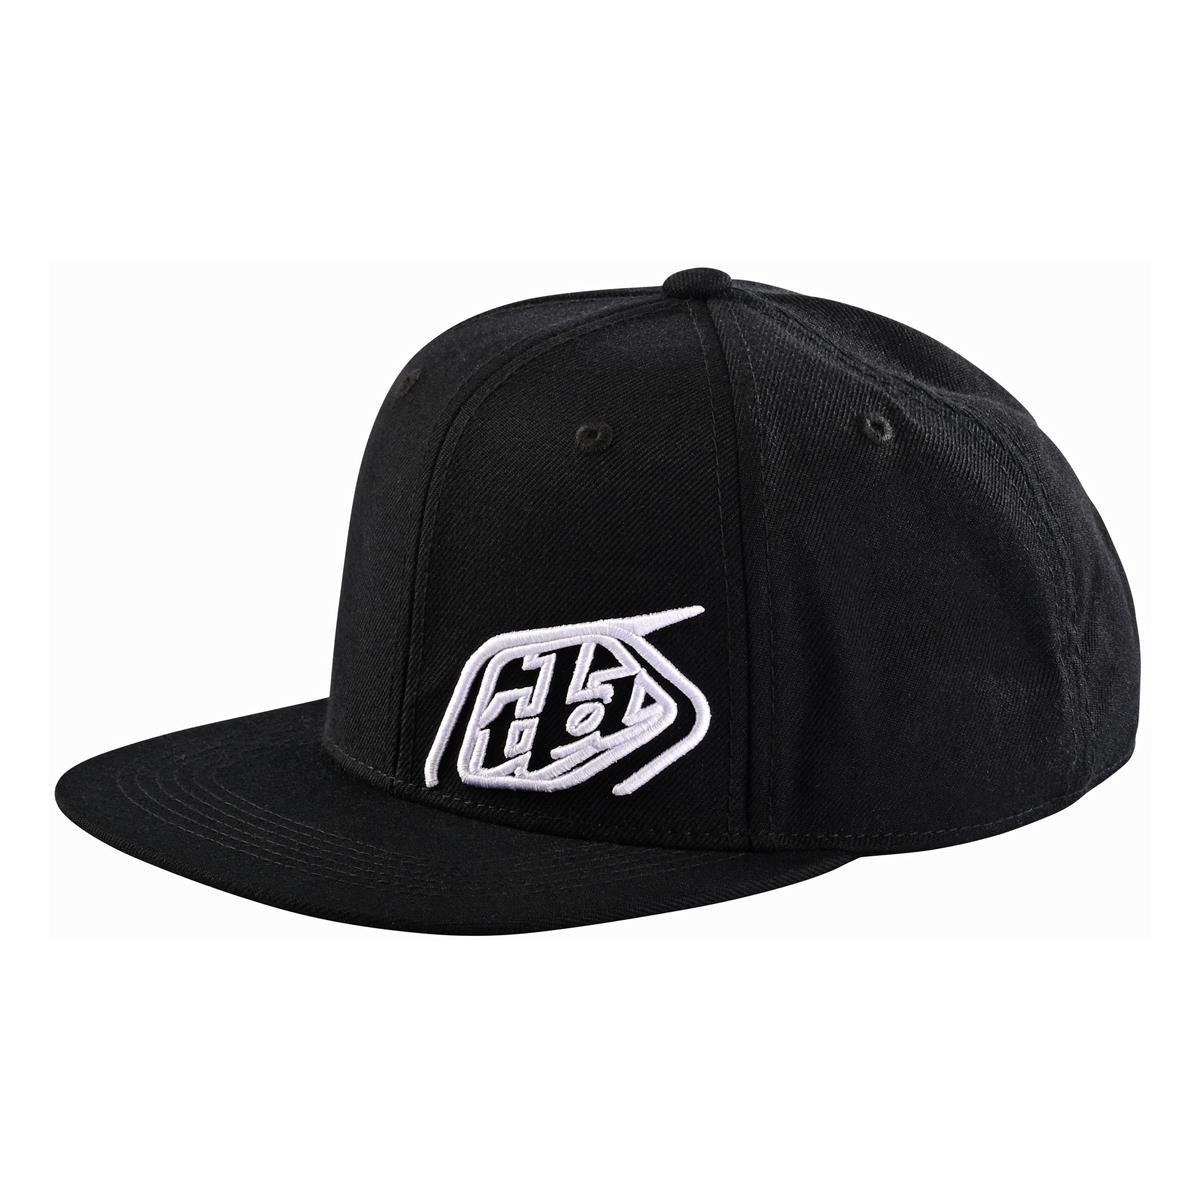 Troy Lee Designs 9Fifty Cappellino Snap Back Slice Nero/Bianco